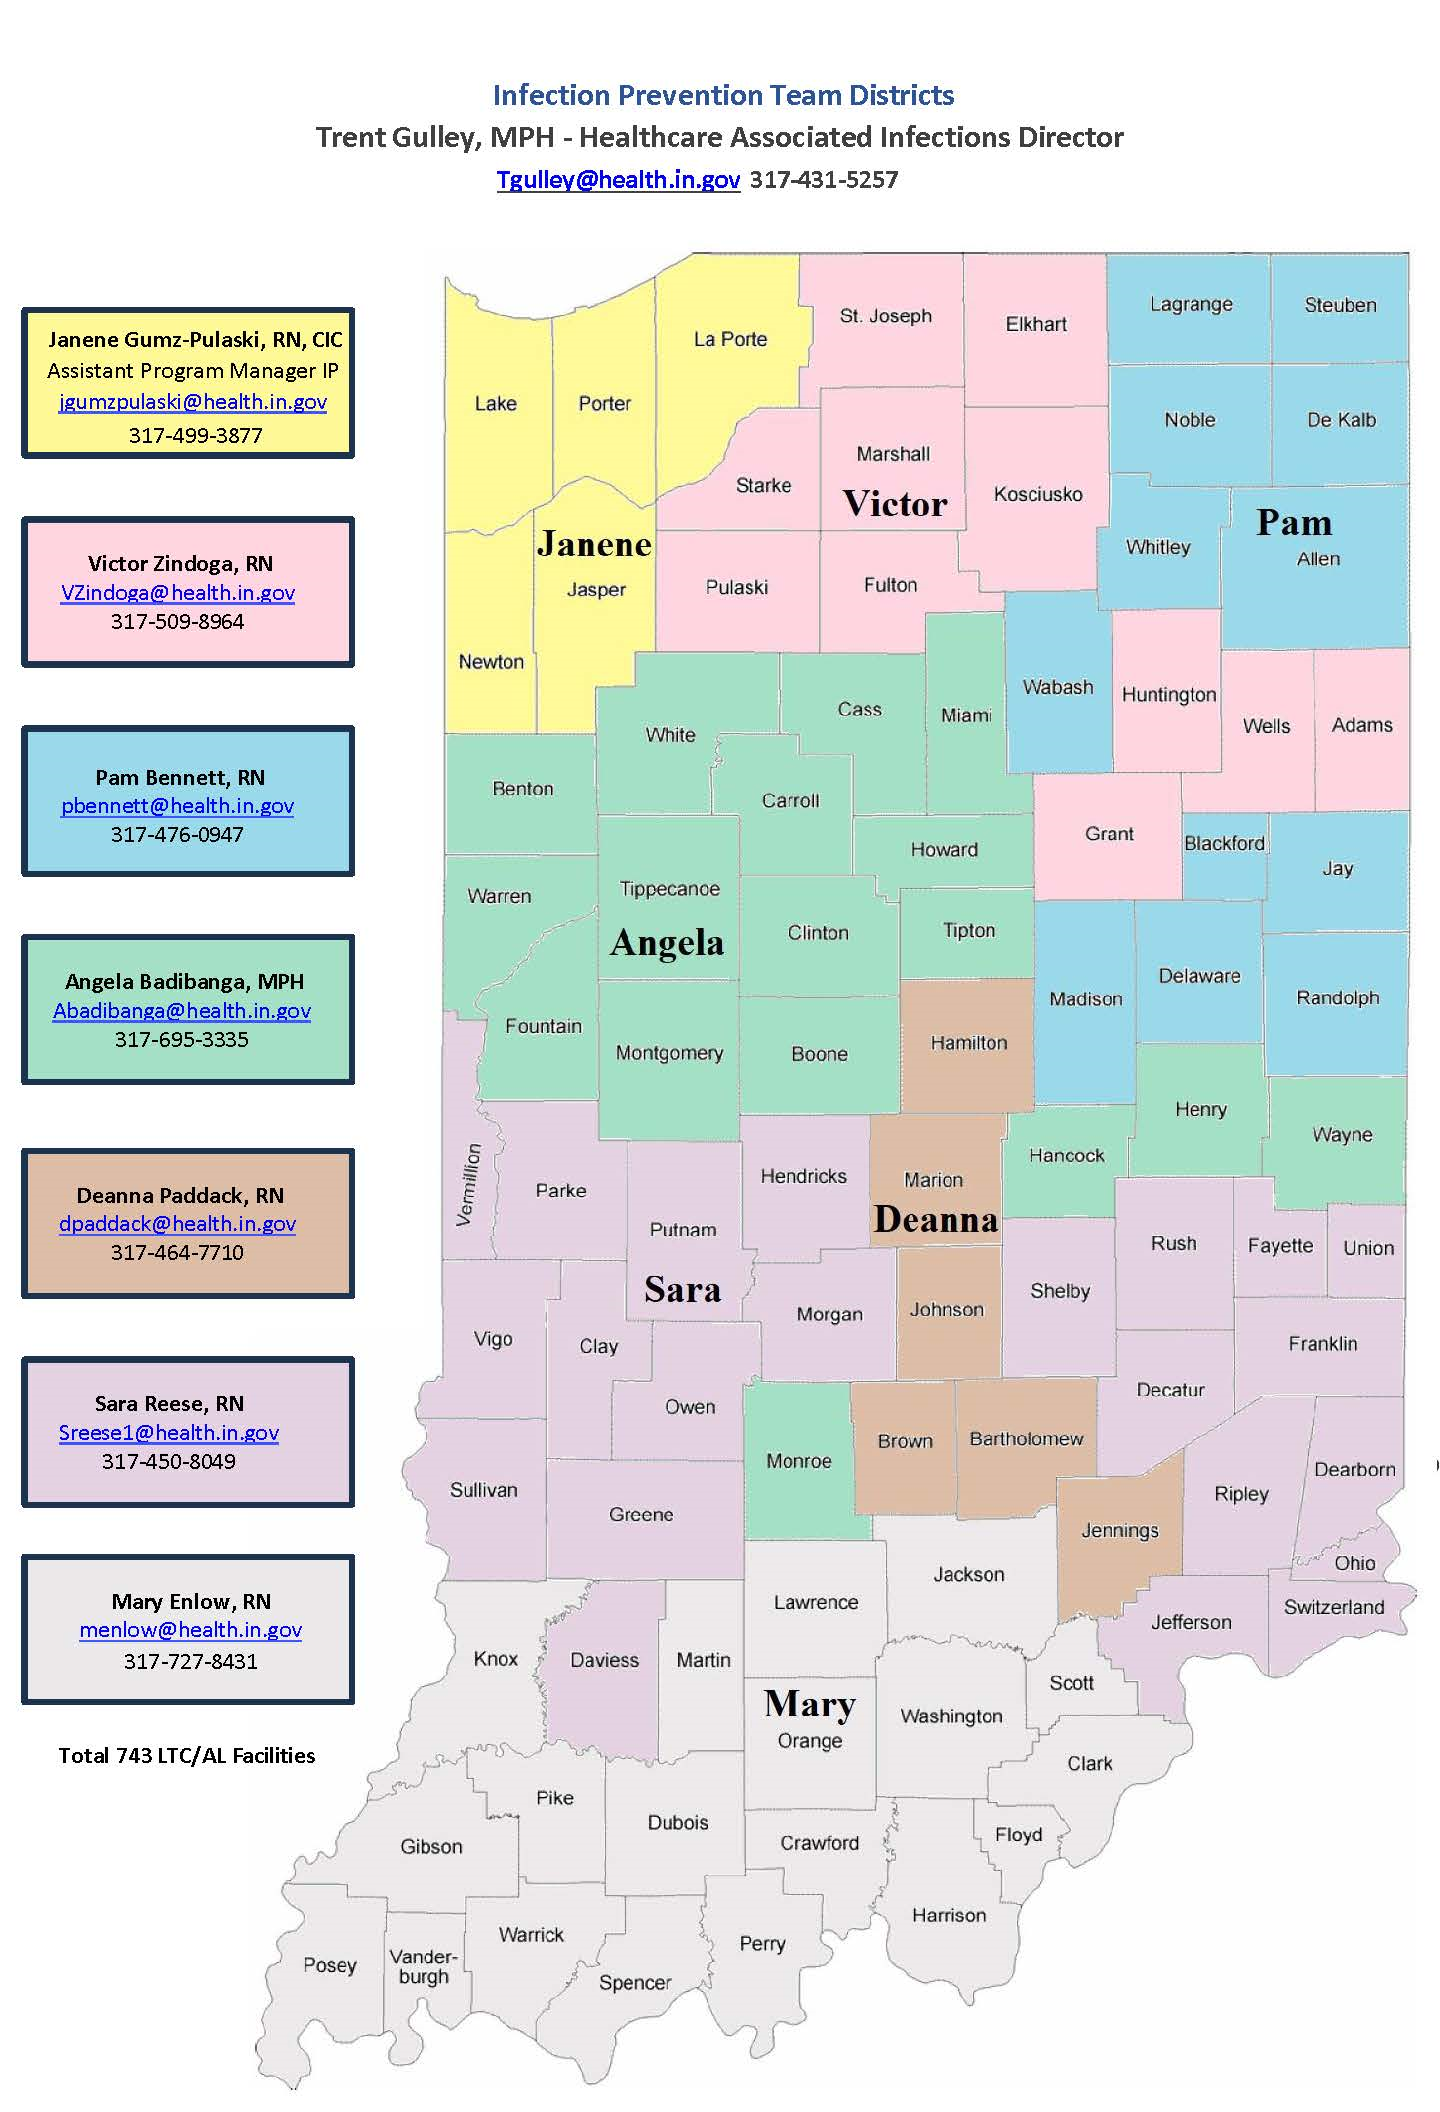 Indiana IP districts by county